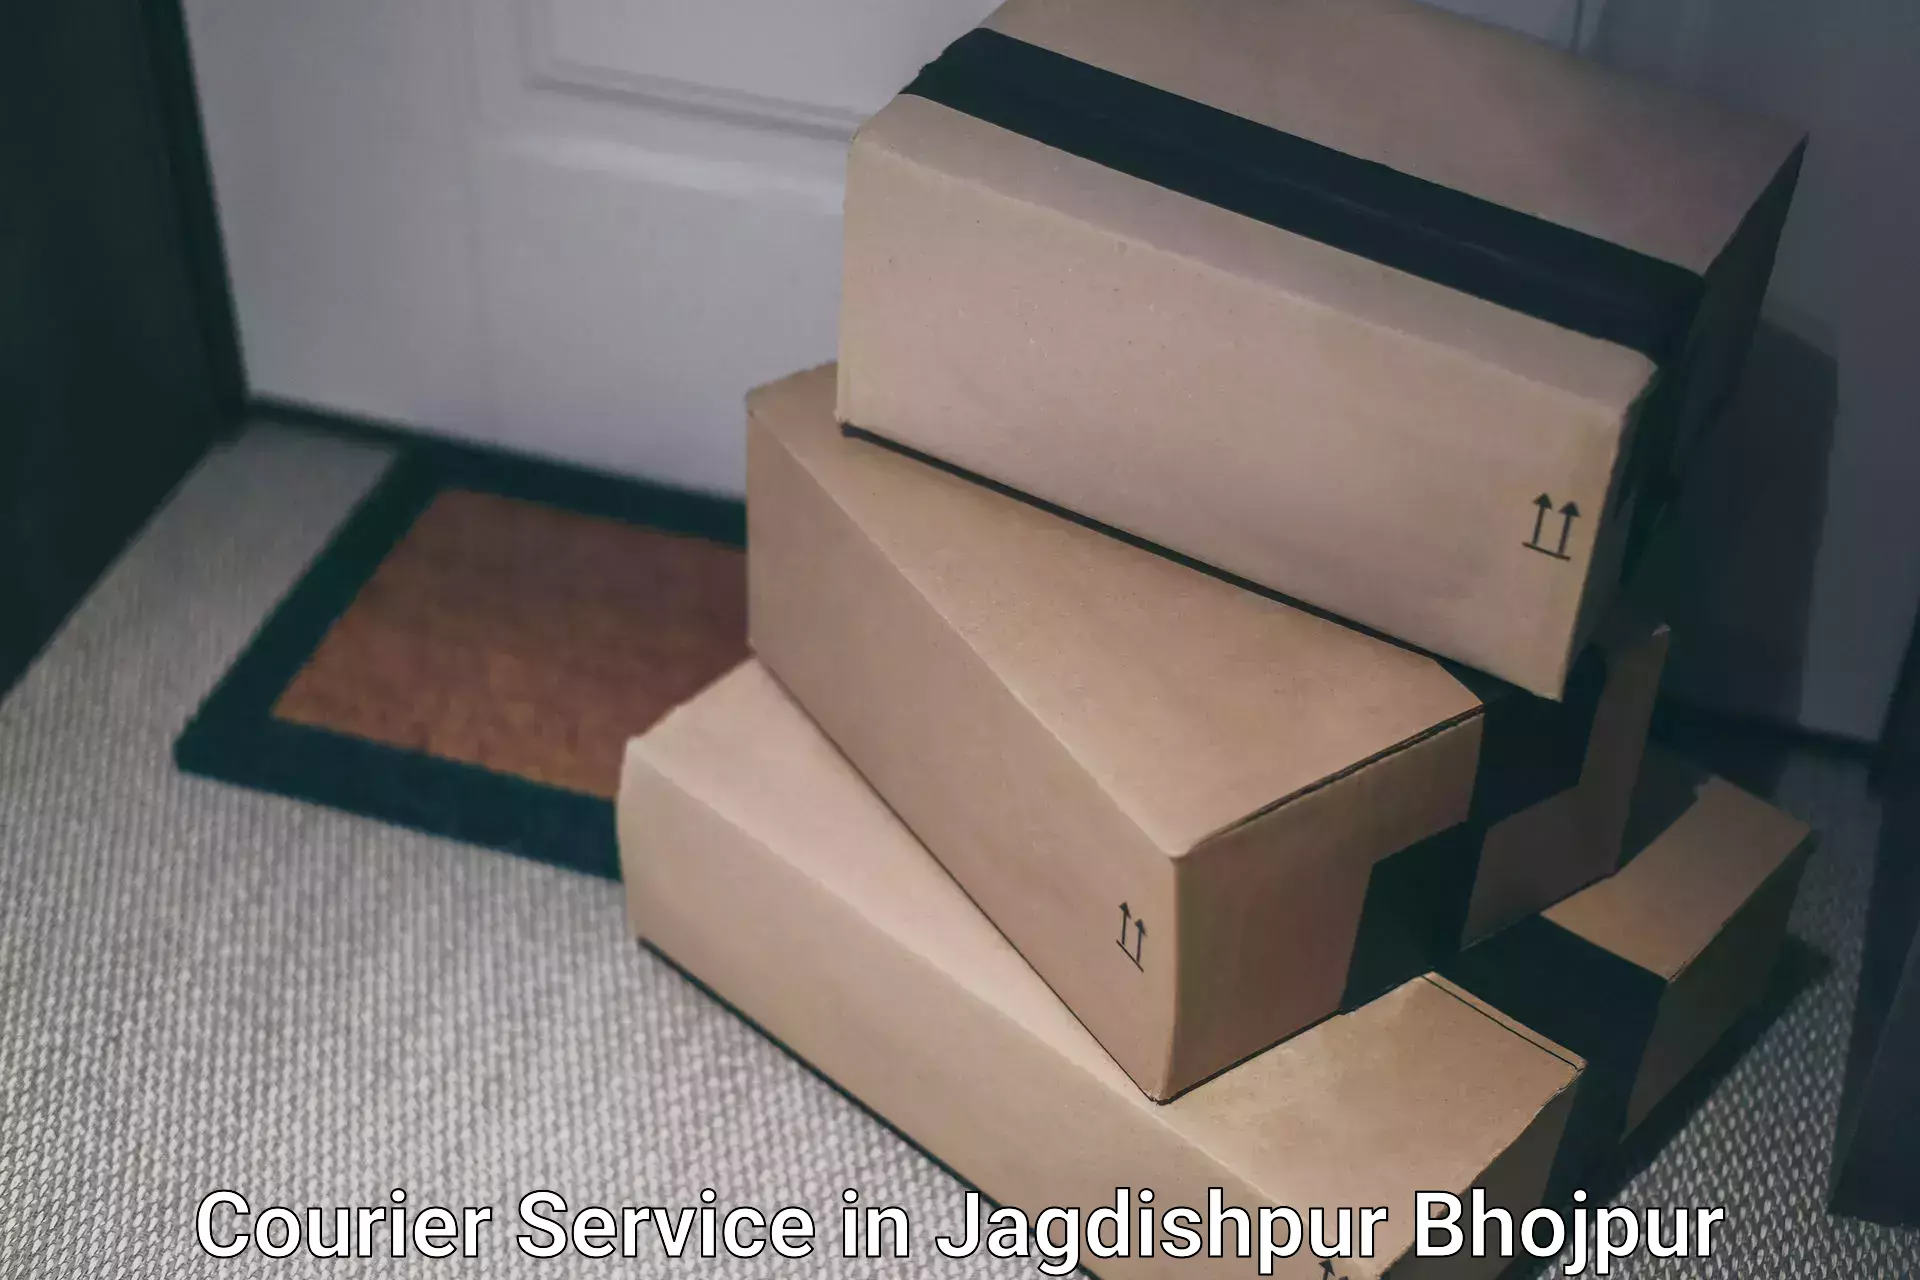 Advanced delivery solutions in Jagdishpur Bhojpur